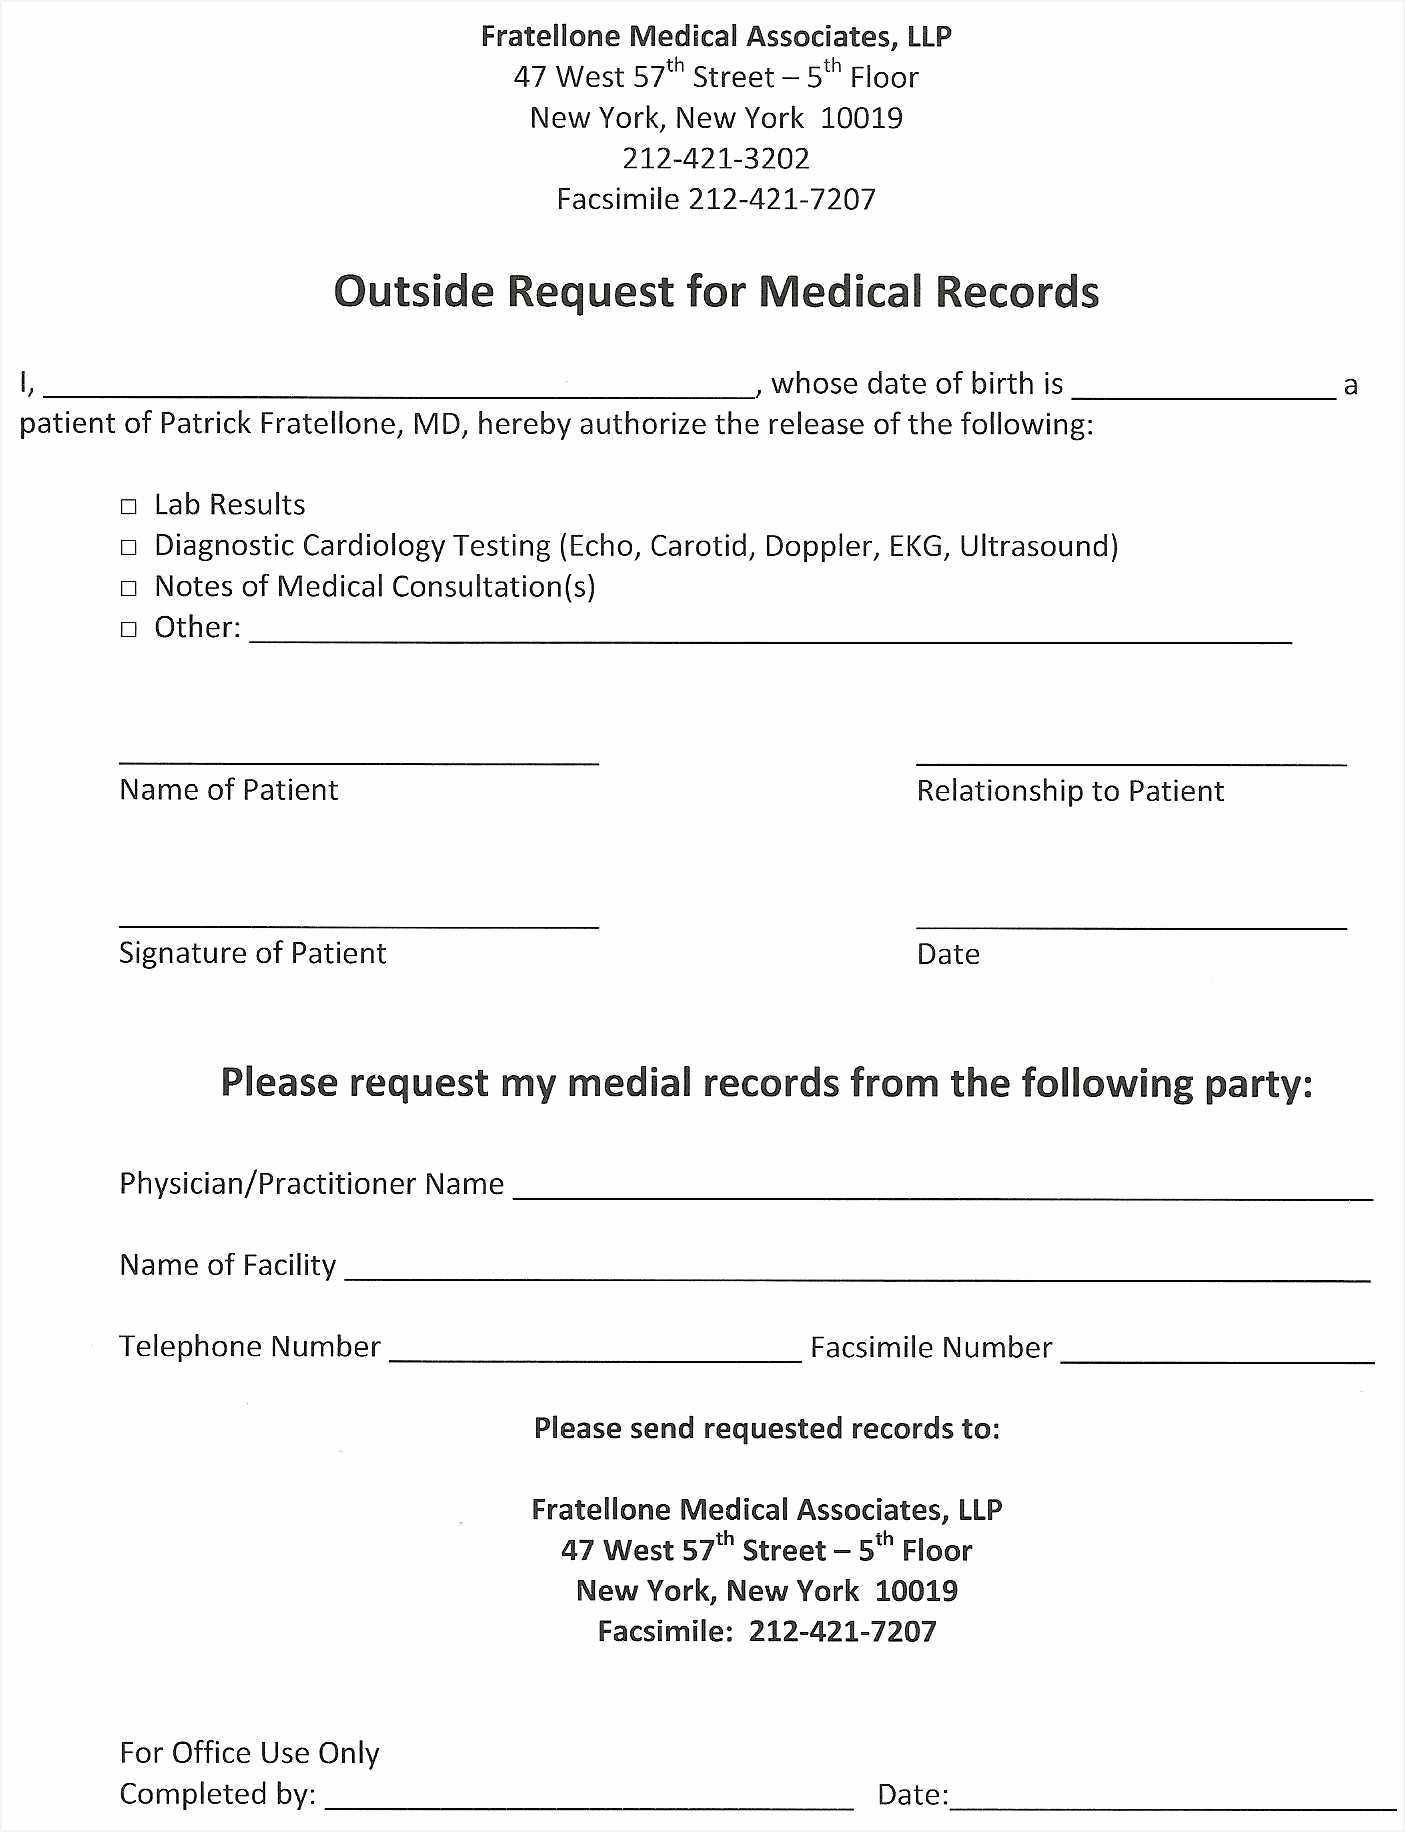 Medical Records Invoice Template Lovely 10 Medical Records Request form Template